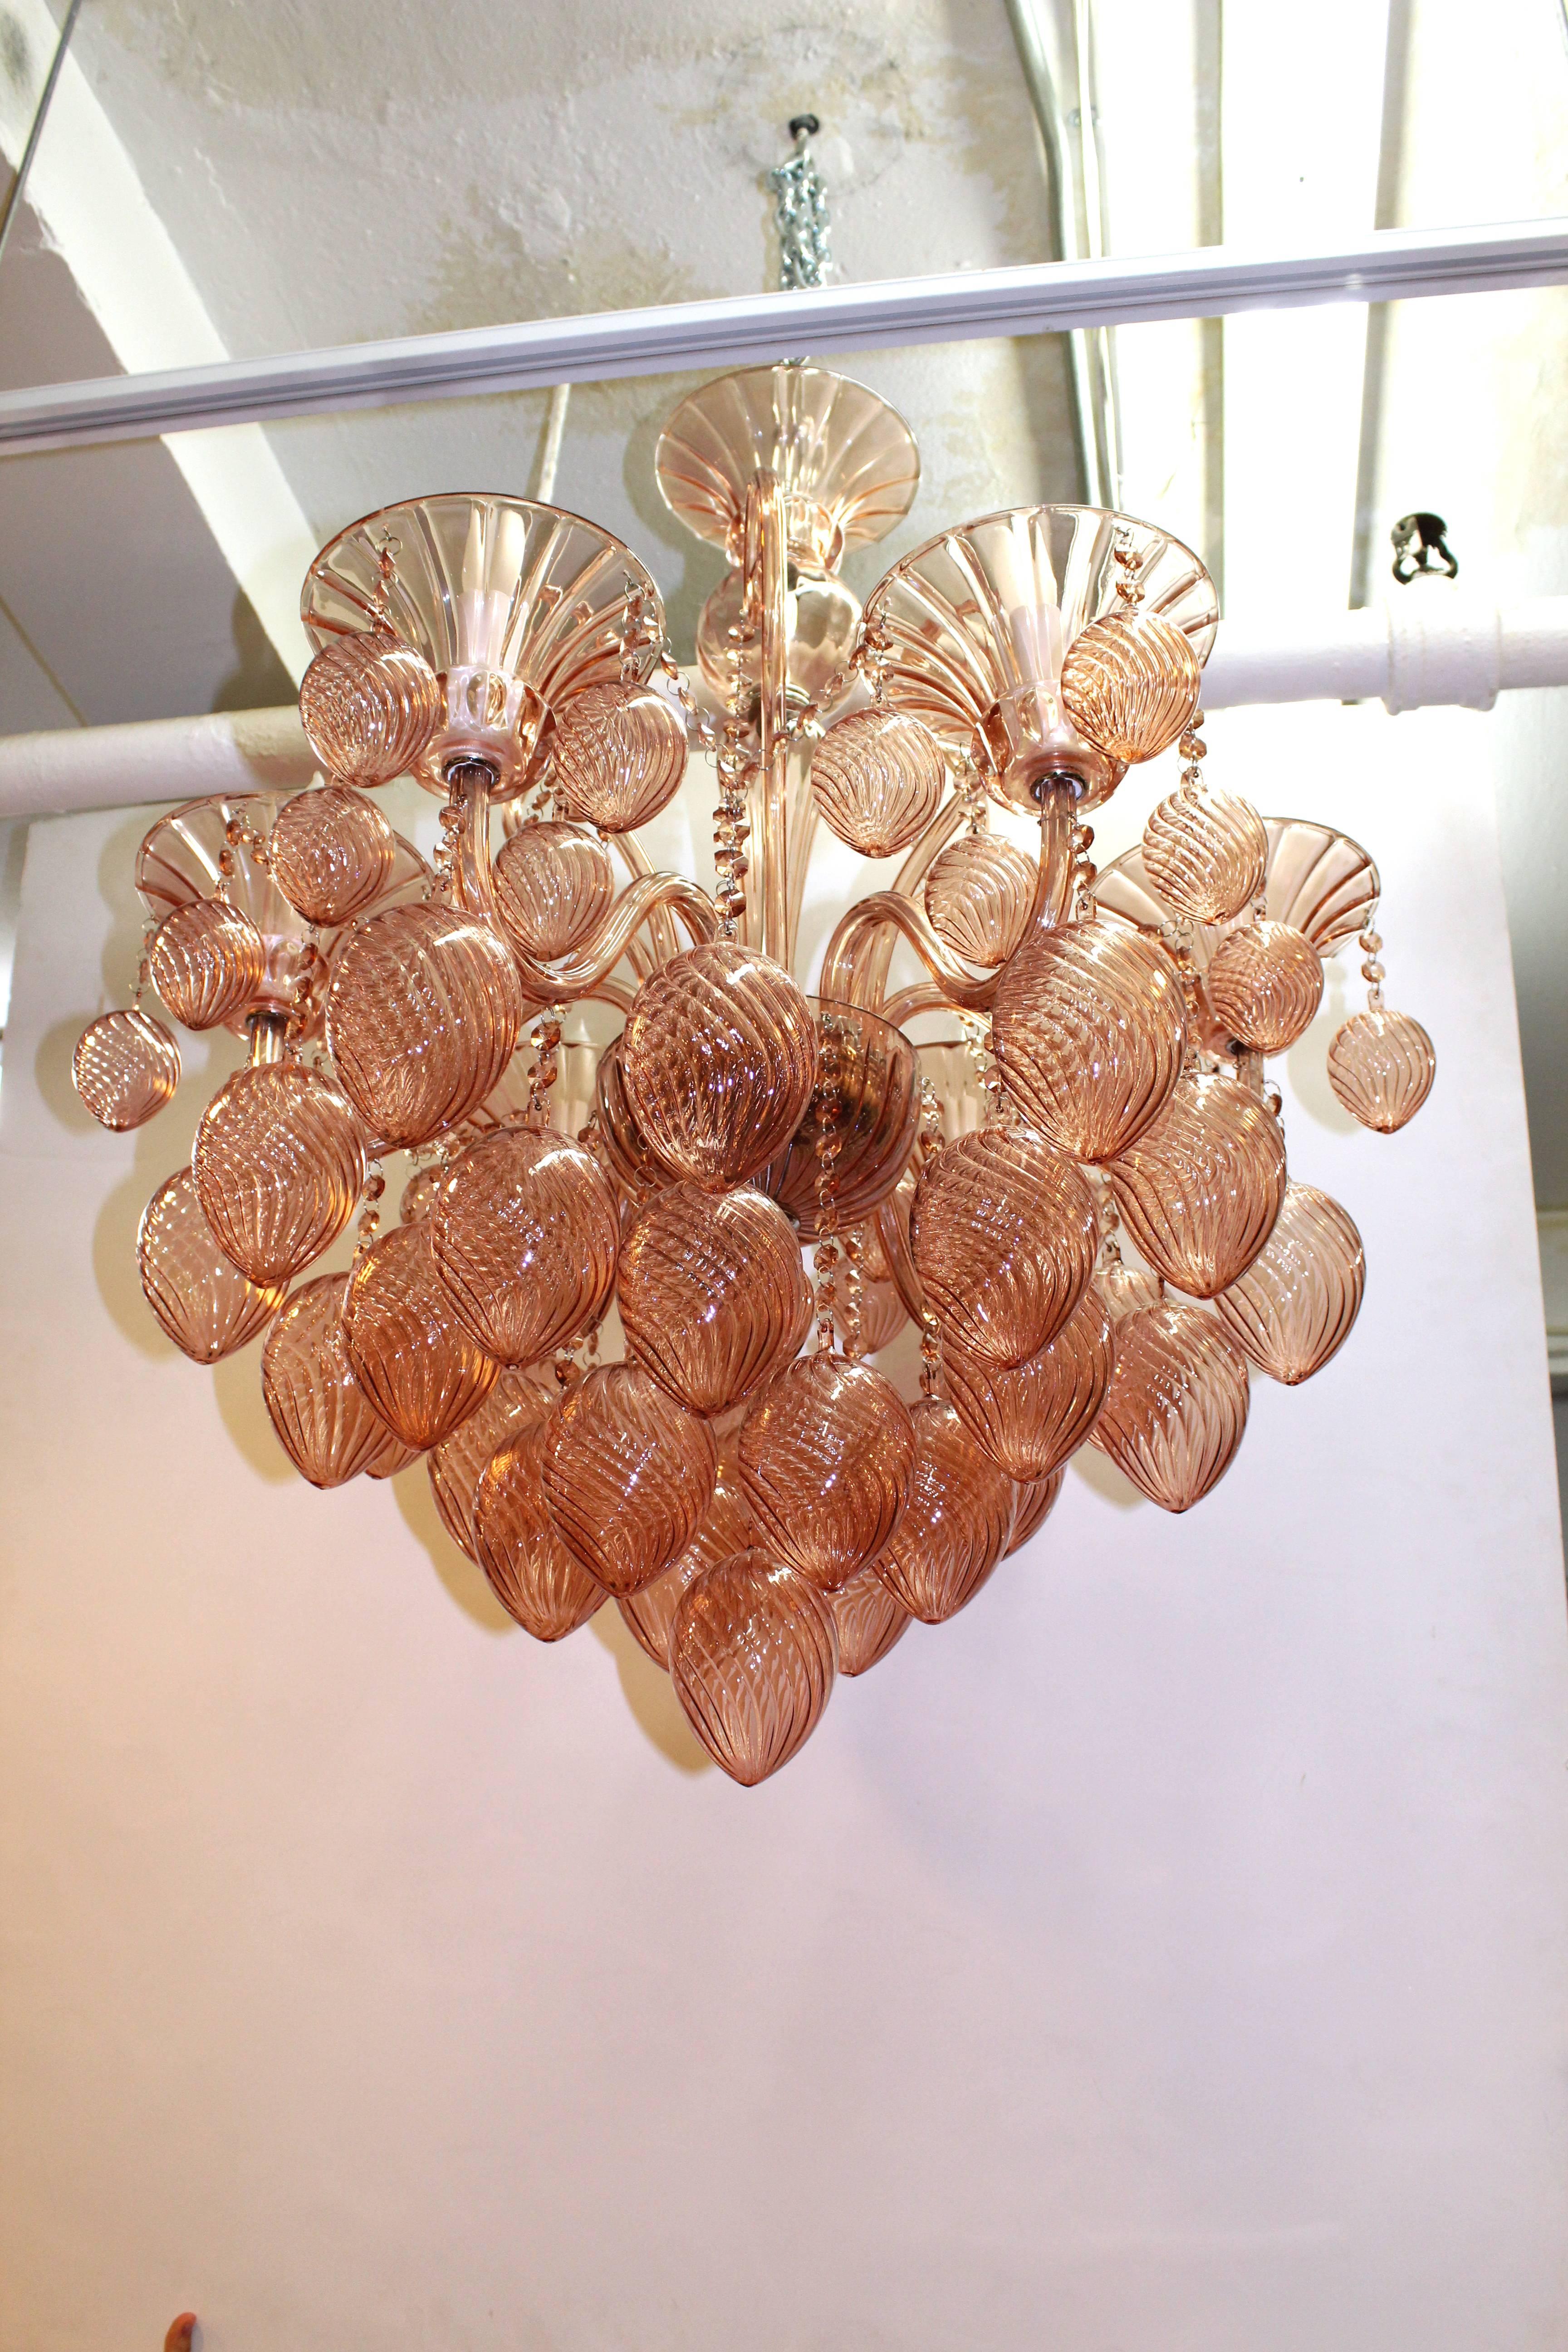 A peachy pink Murano glass chandelier with six lights. Embellished with multiple swirled baubles and glass beads.

110635

